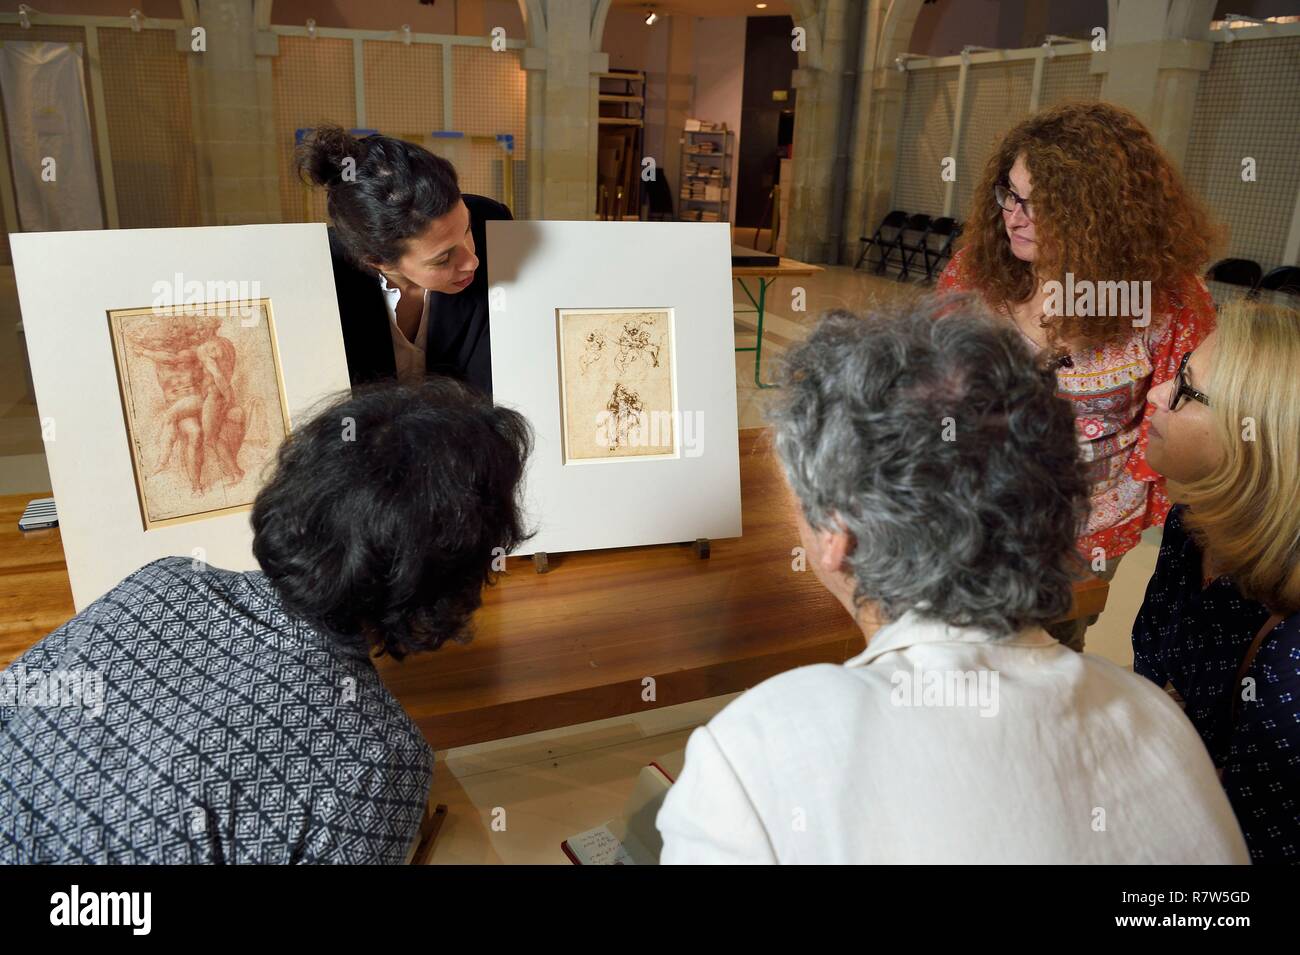 France, Pyrenees Atlantiques, Basque Country, Bayonne, Bonnat-Helleu Museum, Museum of Fine Arts, presentation of Michelangelo's drawing study for the group Adam and Eve of the Sistine Chapel on the left and a study by Leonardo da Vinci on the right Stock Photo